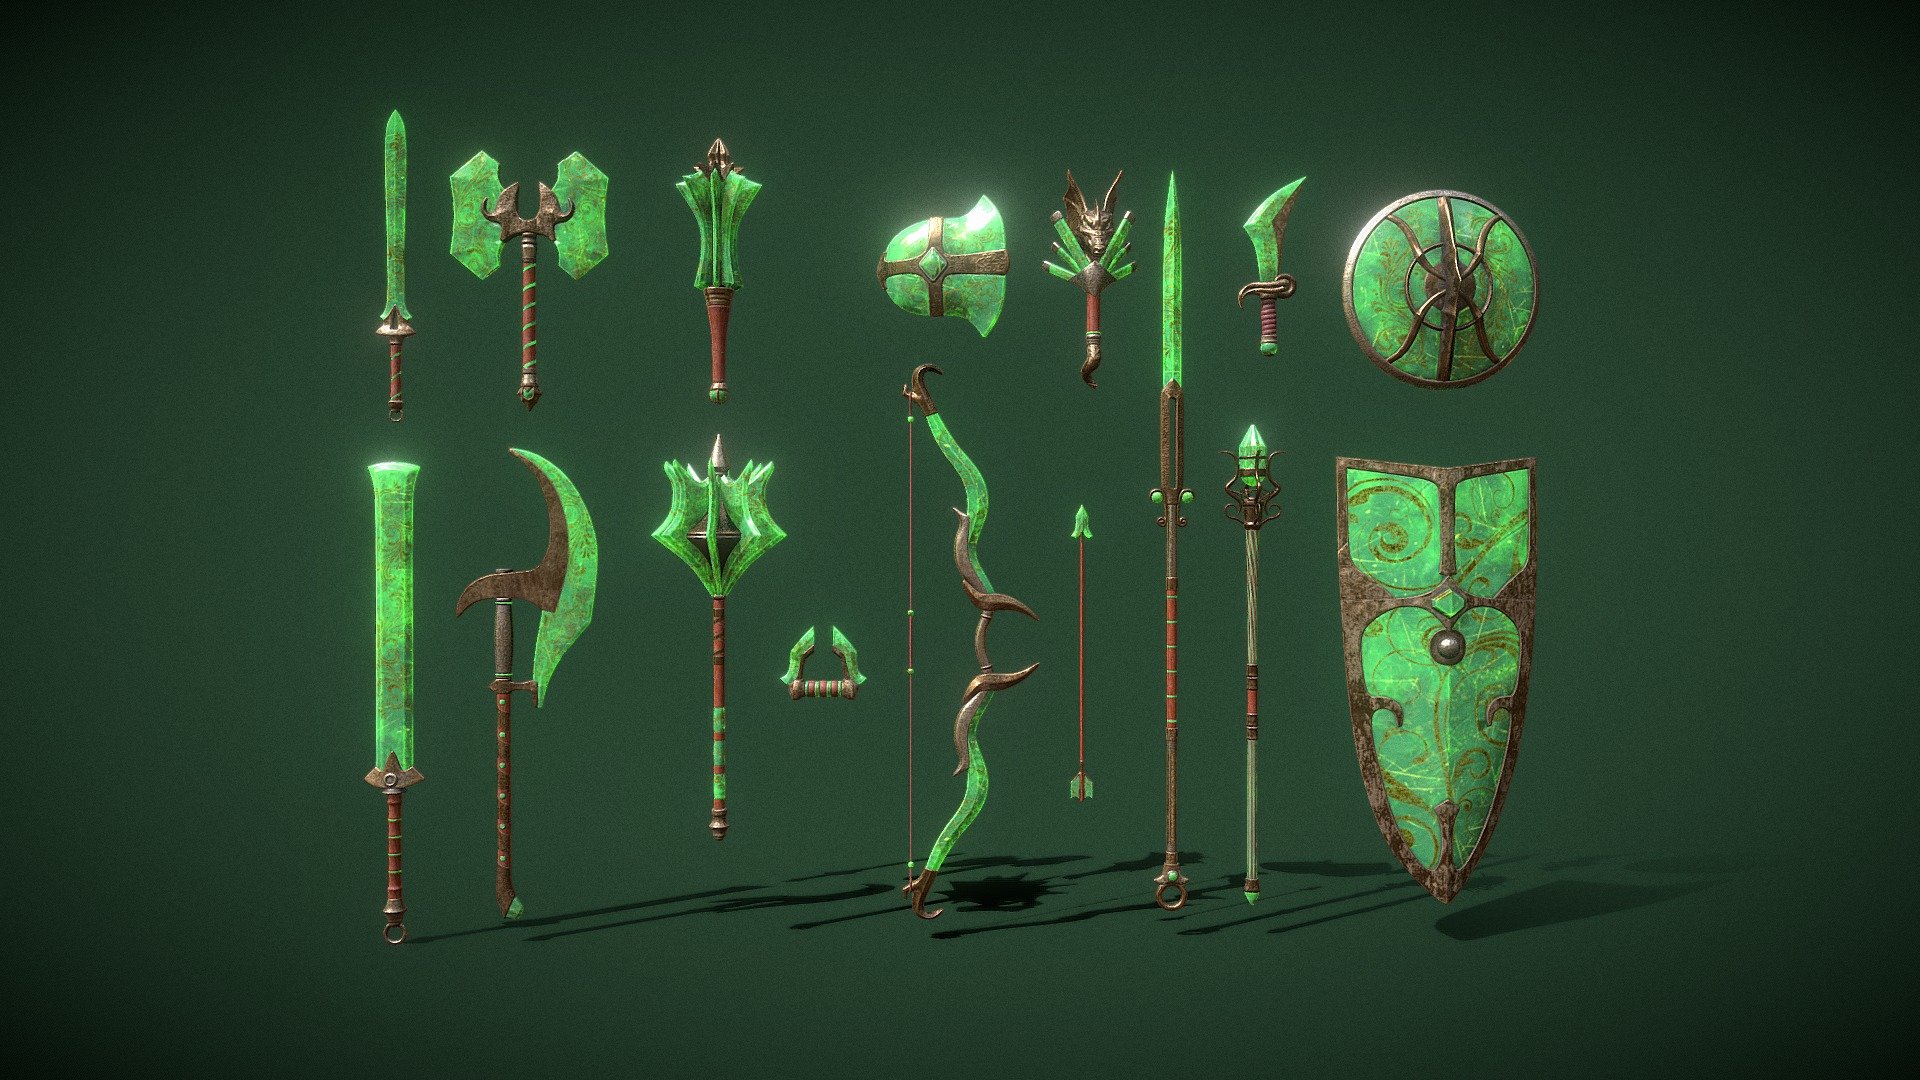 A set of fantasy Jade weapons.

The set consists of sixteen unique objects.

PBR textures have a resolution of 2048x2048.

Total polygons: 52398 triangles; 26738 vertices.

1) Sword (one-handed) - 2044 tris

2) Sword (two-handed) - 3248 tris

3) Mace (one-handed) - 3556 tris

4) Mace (two-handed) - 5112 tris

5) Ax (one-handed) - 2604 tris

6) Ax (two-handed) - 2004 tris

7) Lance - 3188 tris

8) Dagger - 2660 tris

9) Brass knuckles - 1708 tris

10) Bow - 5084 tris

11) Staff - 6708 tris

12) Scepter - 4144 tris

13) Shield (small) - 2002 tris

14) Shield (medium) - 3808 tris

15) Shield (great) - 3800 tris

16) Arrow - 728 tris

Archives with textures contain:

PNG textures - base color, metallic, normal, roughness, opacity, glow

Texturing Unity (Metallic Smoothness) - AlbedoTransparency, MetallicSmoothness, Normal, Emission

Texturing Unreal Engine - BaseColor, Normal, OcclusionRoughnessMetallic, Emissive - Fantasy Jade Weapon Set - 3D model by zilbeerman 3d model